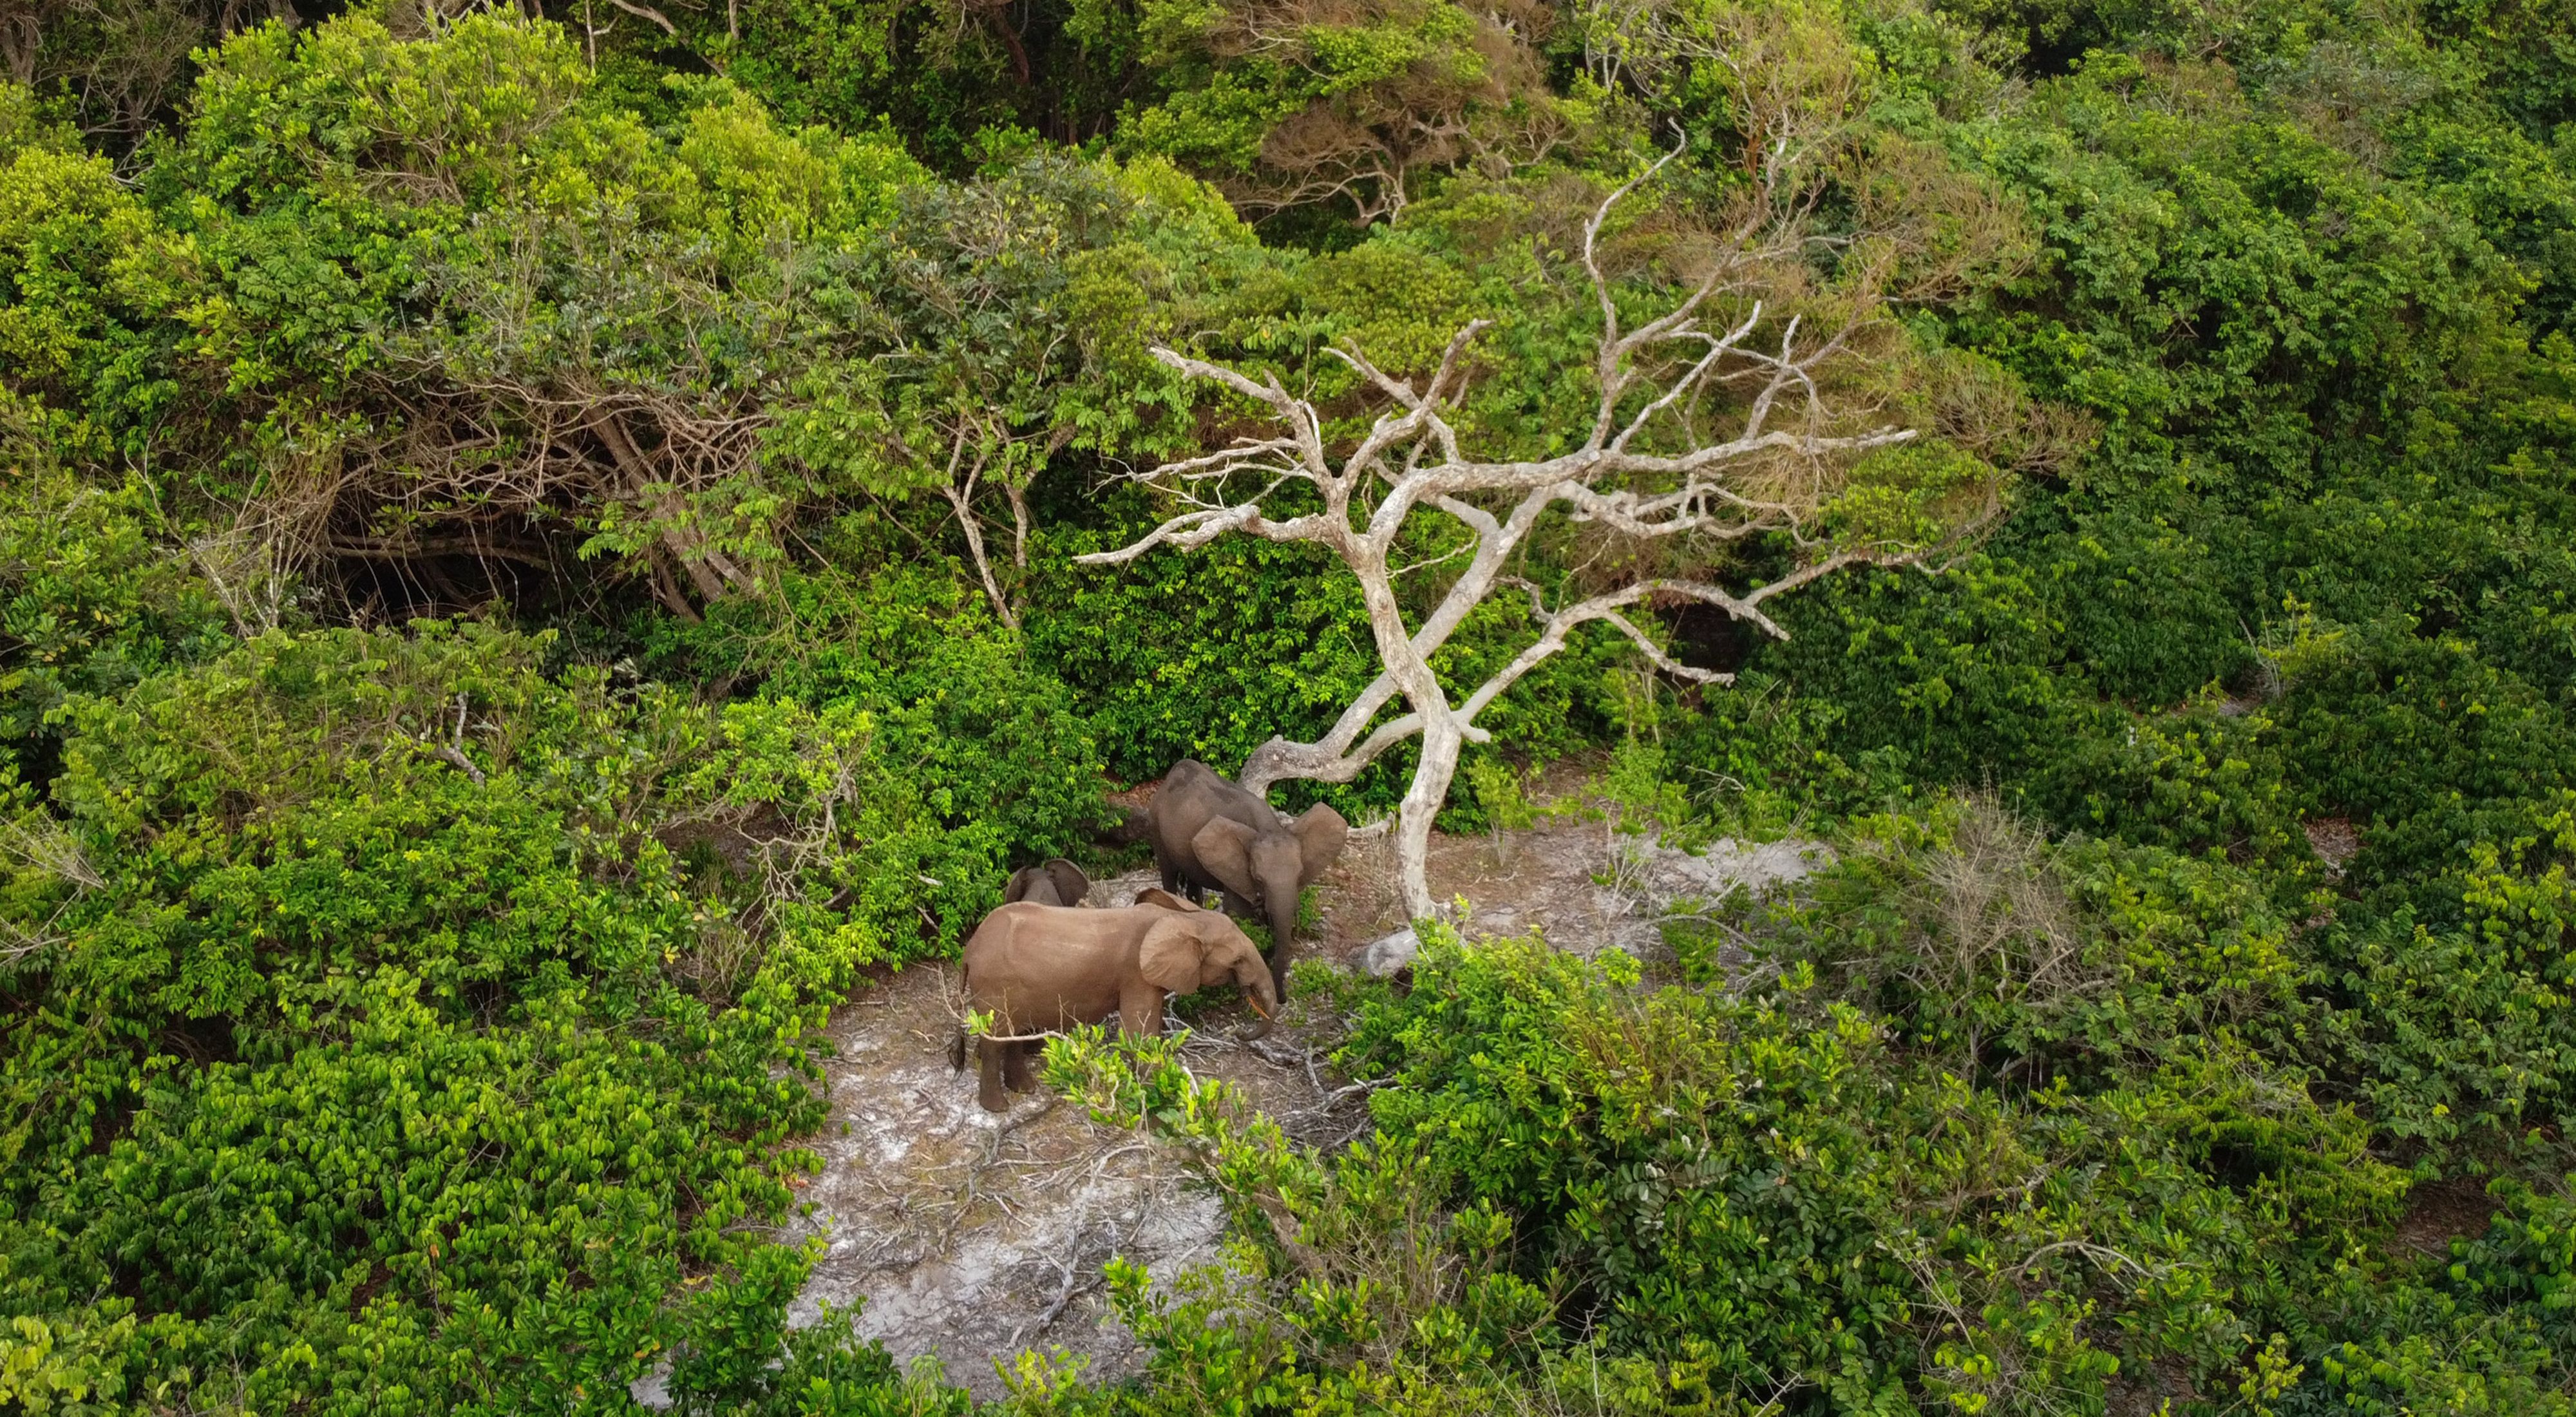 Aerial photo of three elephants in the Gabon forest.